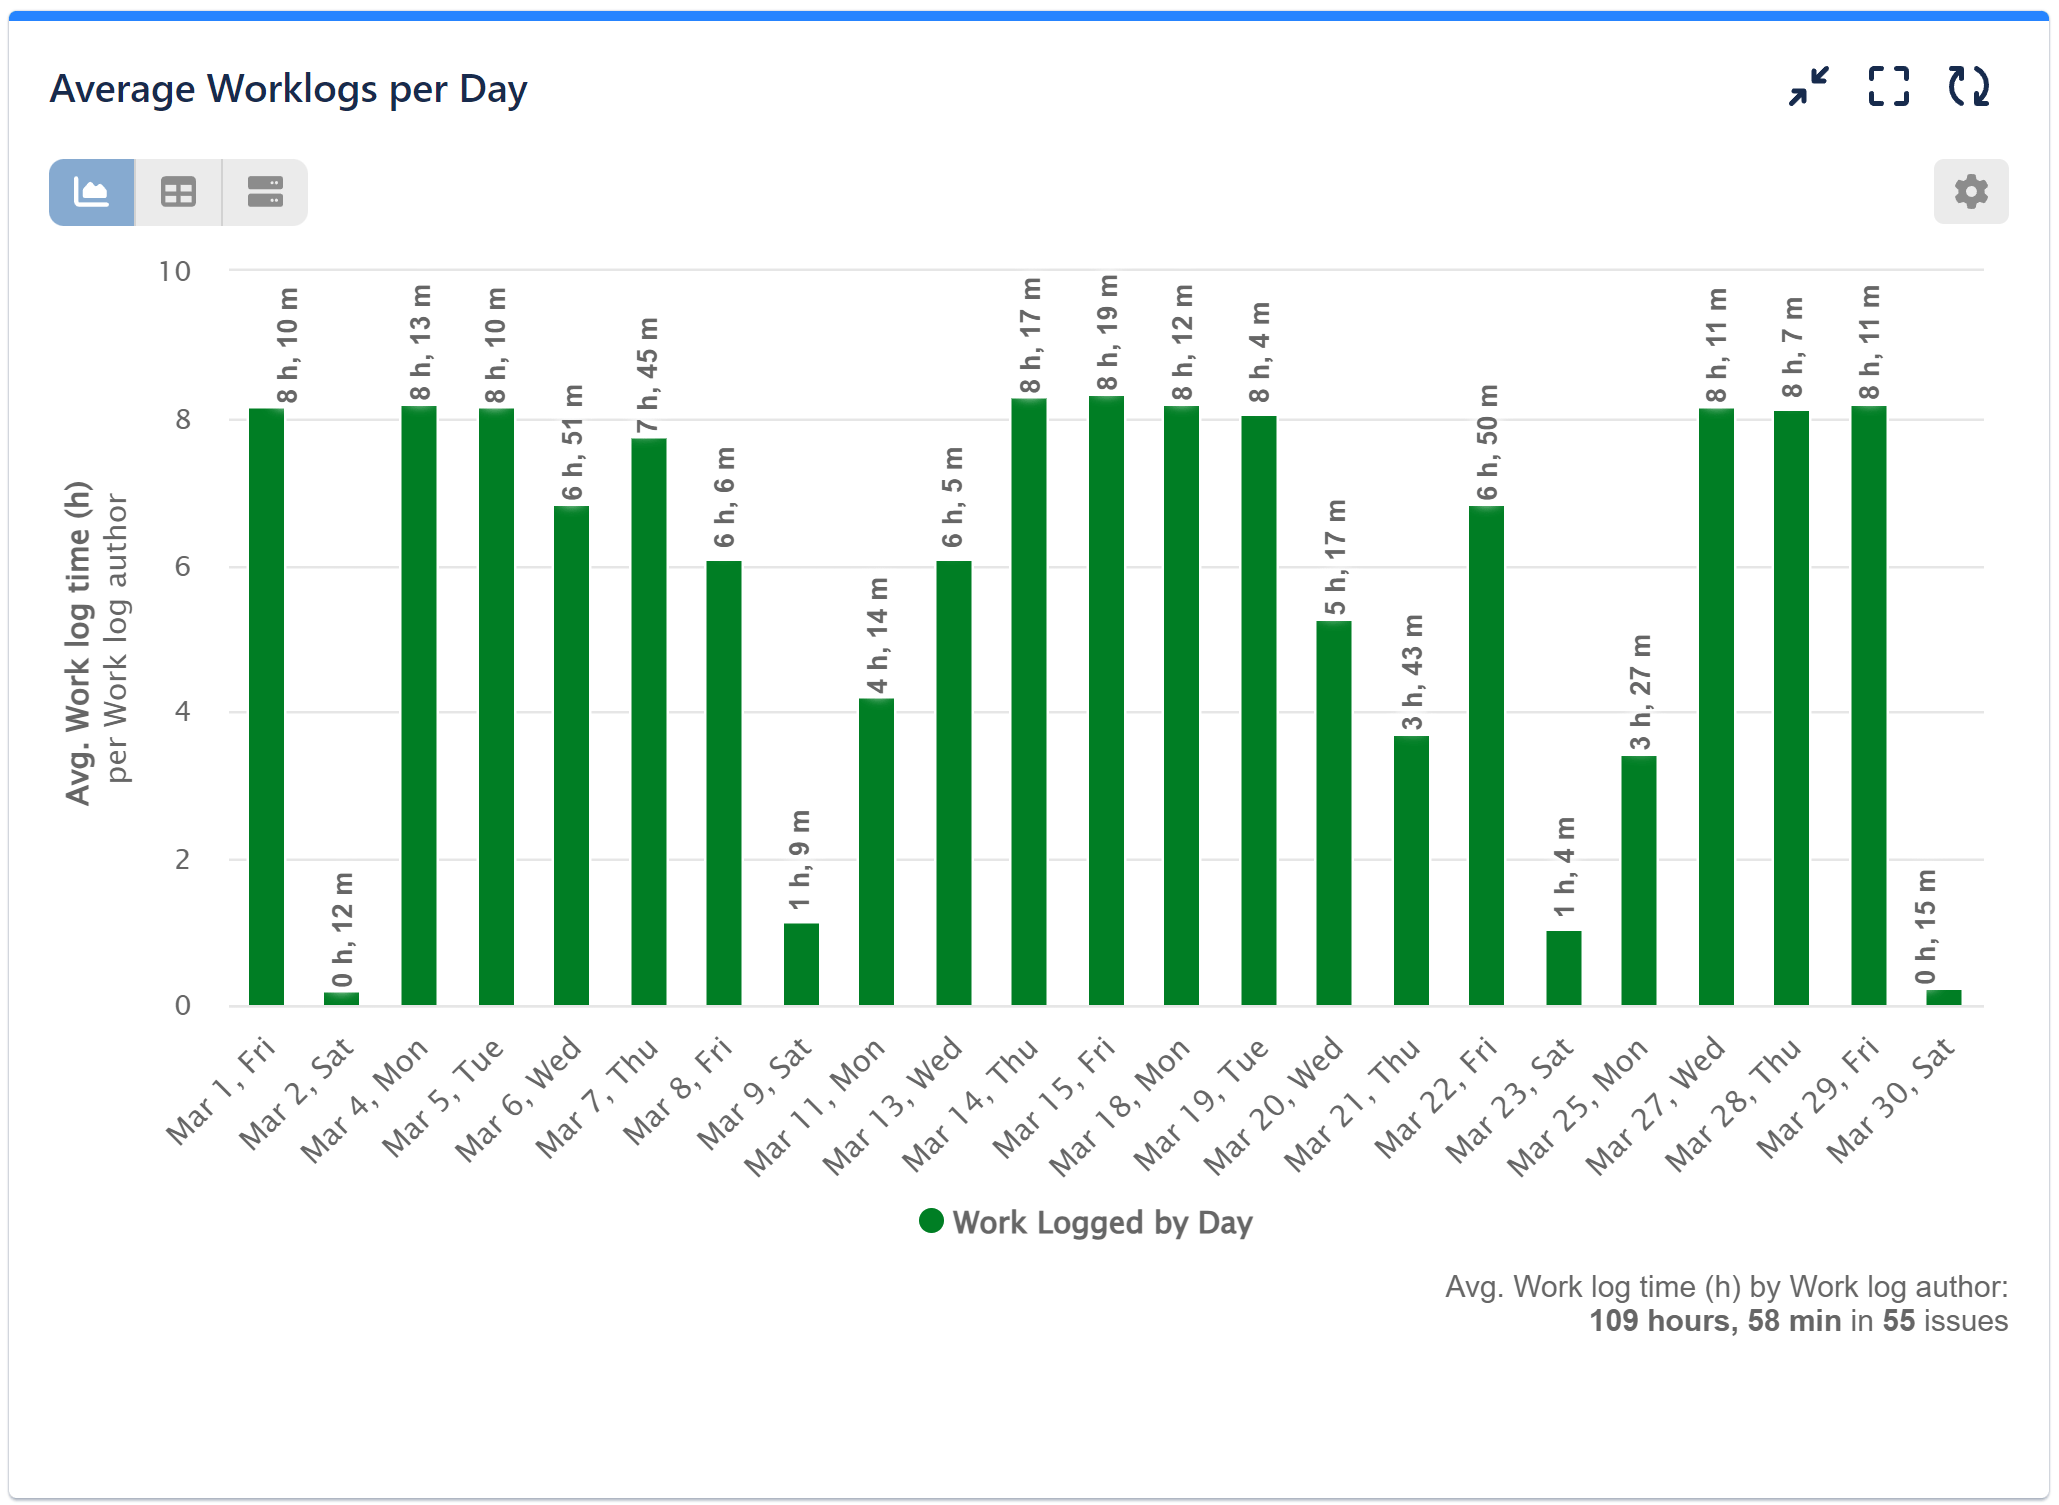 Average worklog times per worklog author per day